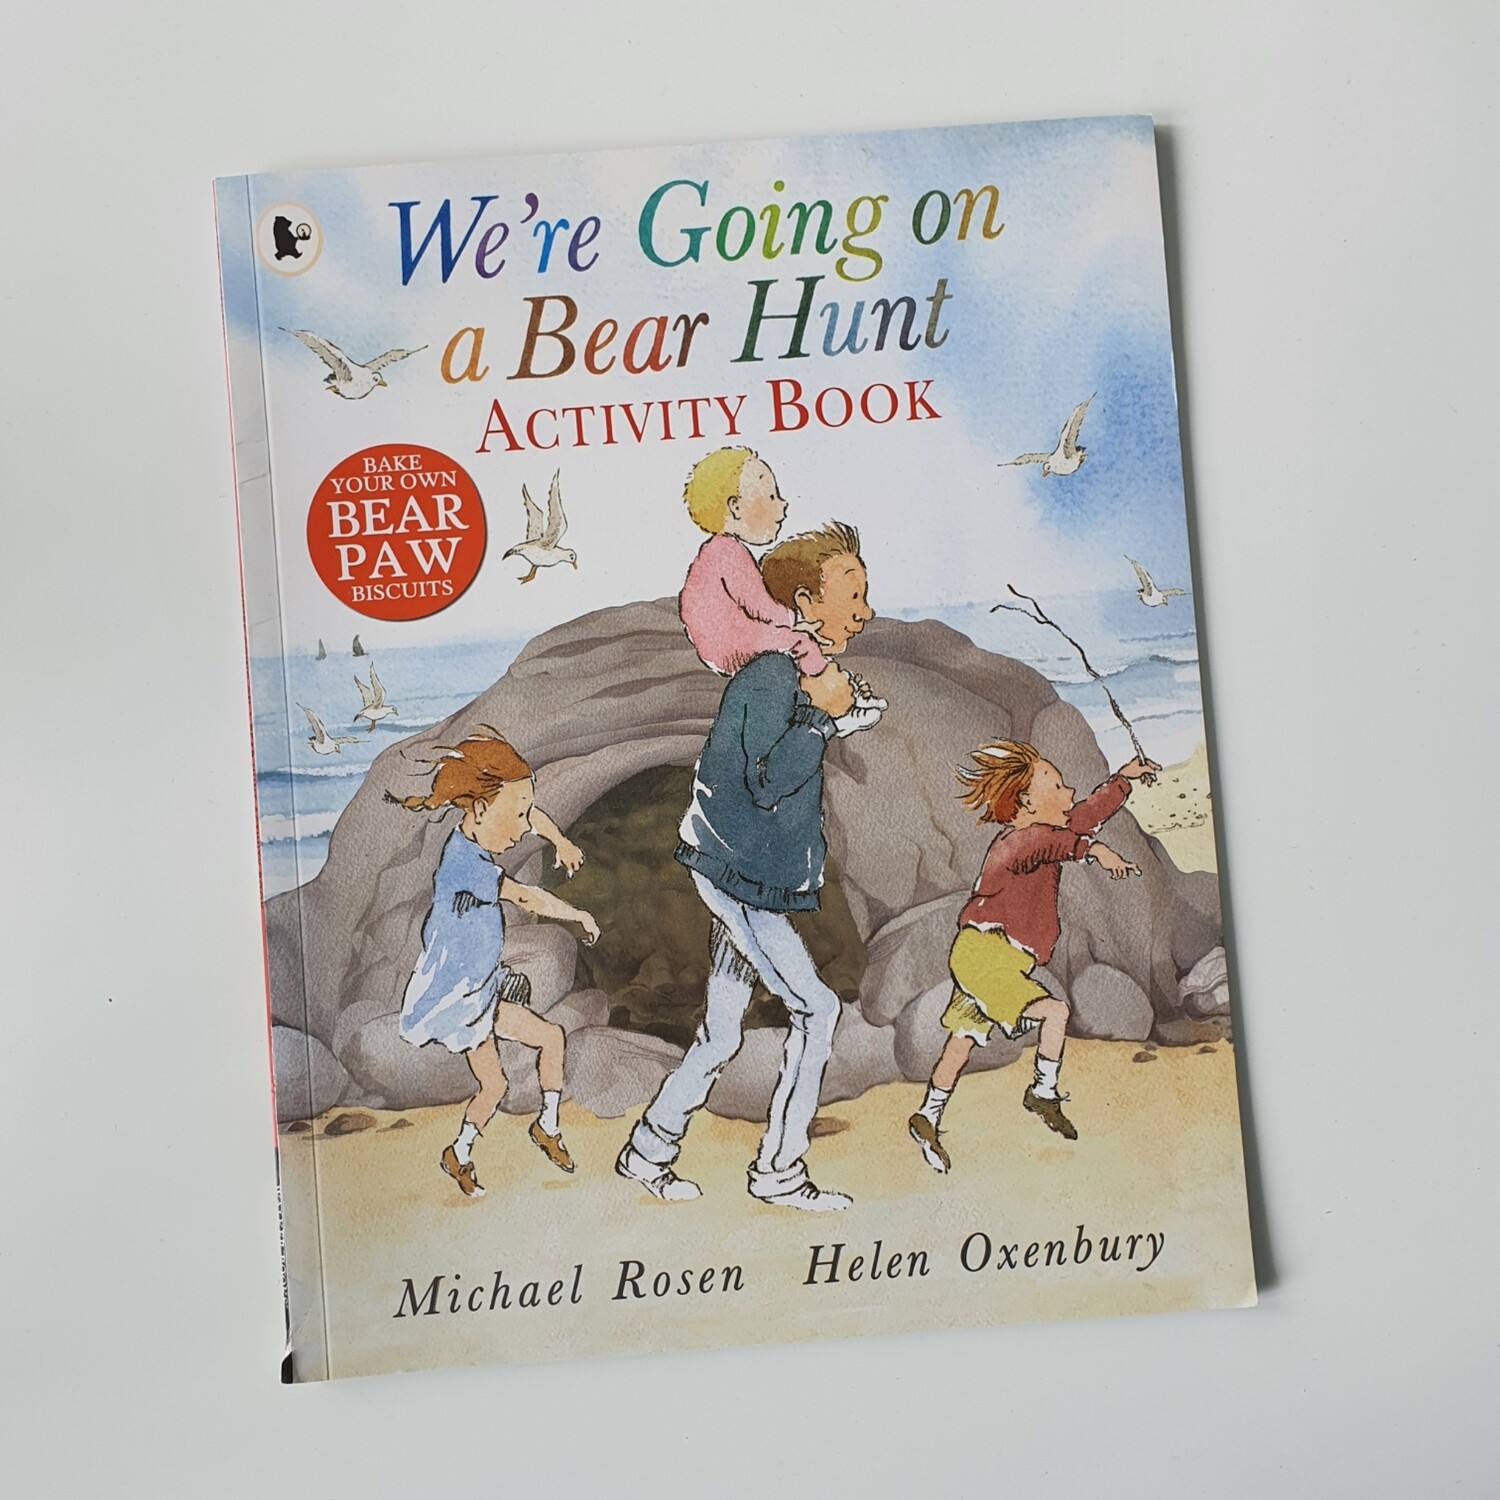 We're Going on a Bear Hunt Activity Book - made from a paperback book, no original book pages